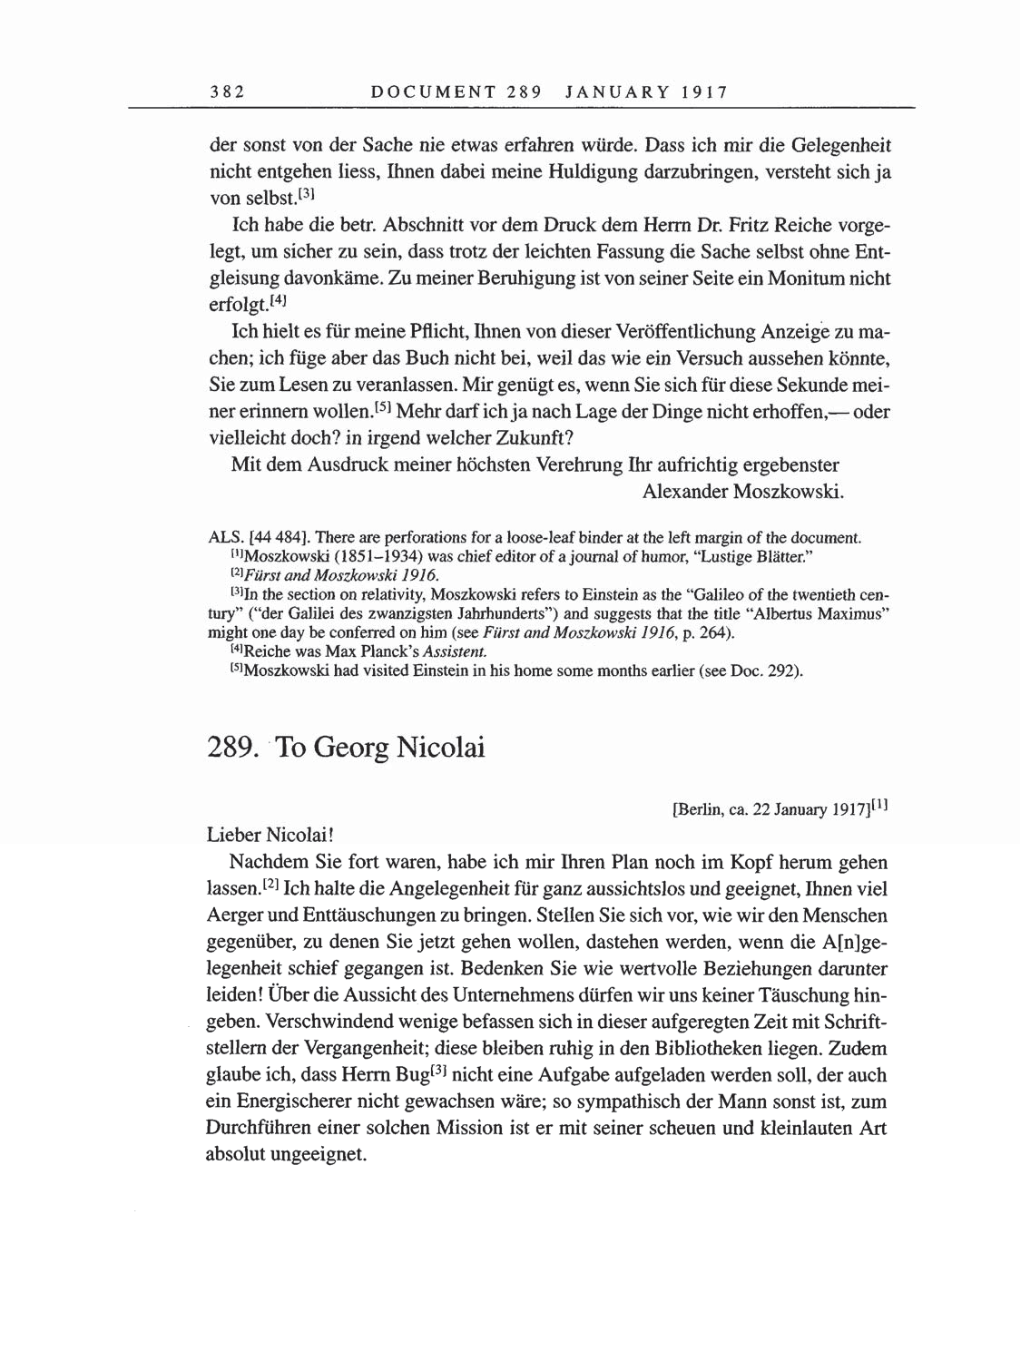 Volume 8, Part A: The Berlin Years: Correspondence 1914-1917 page 382